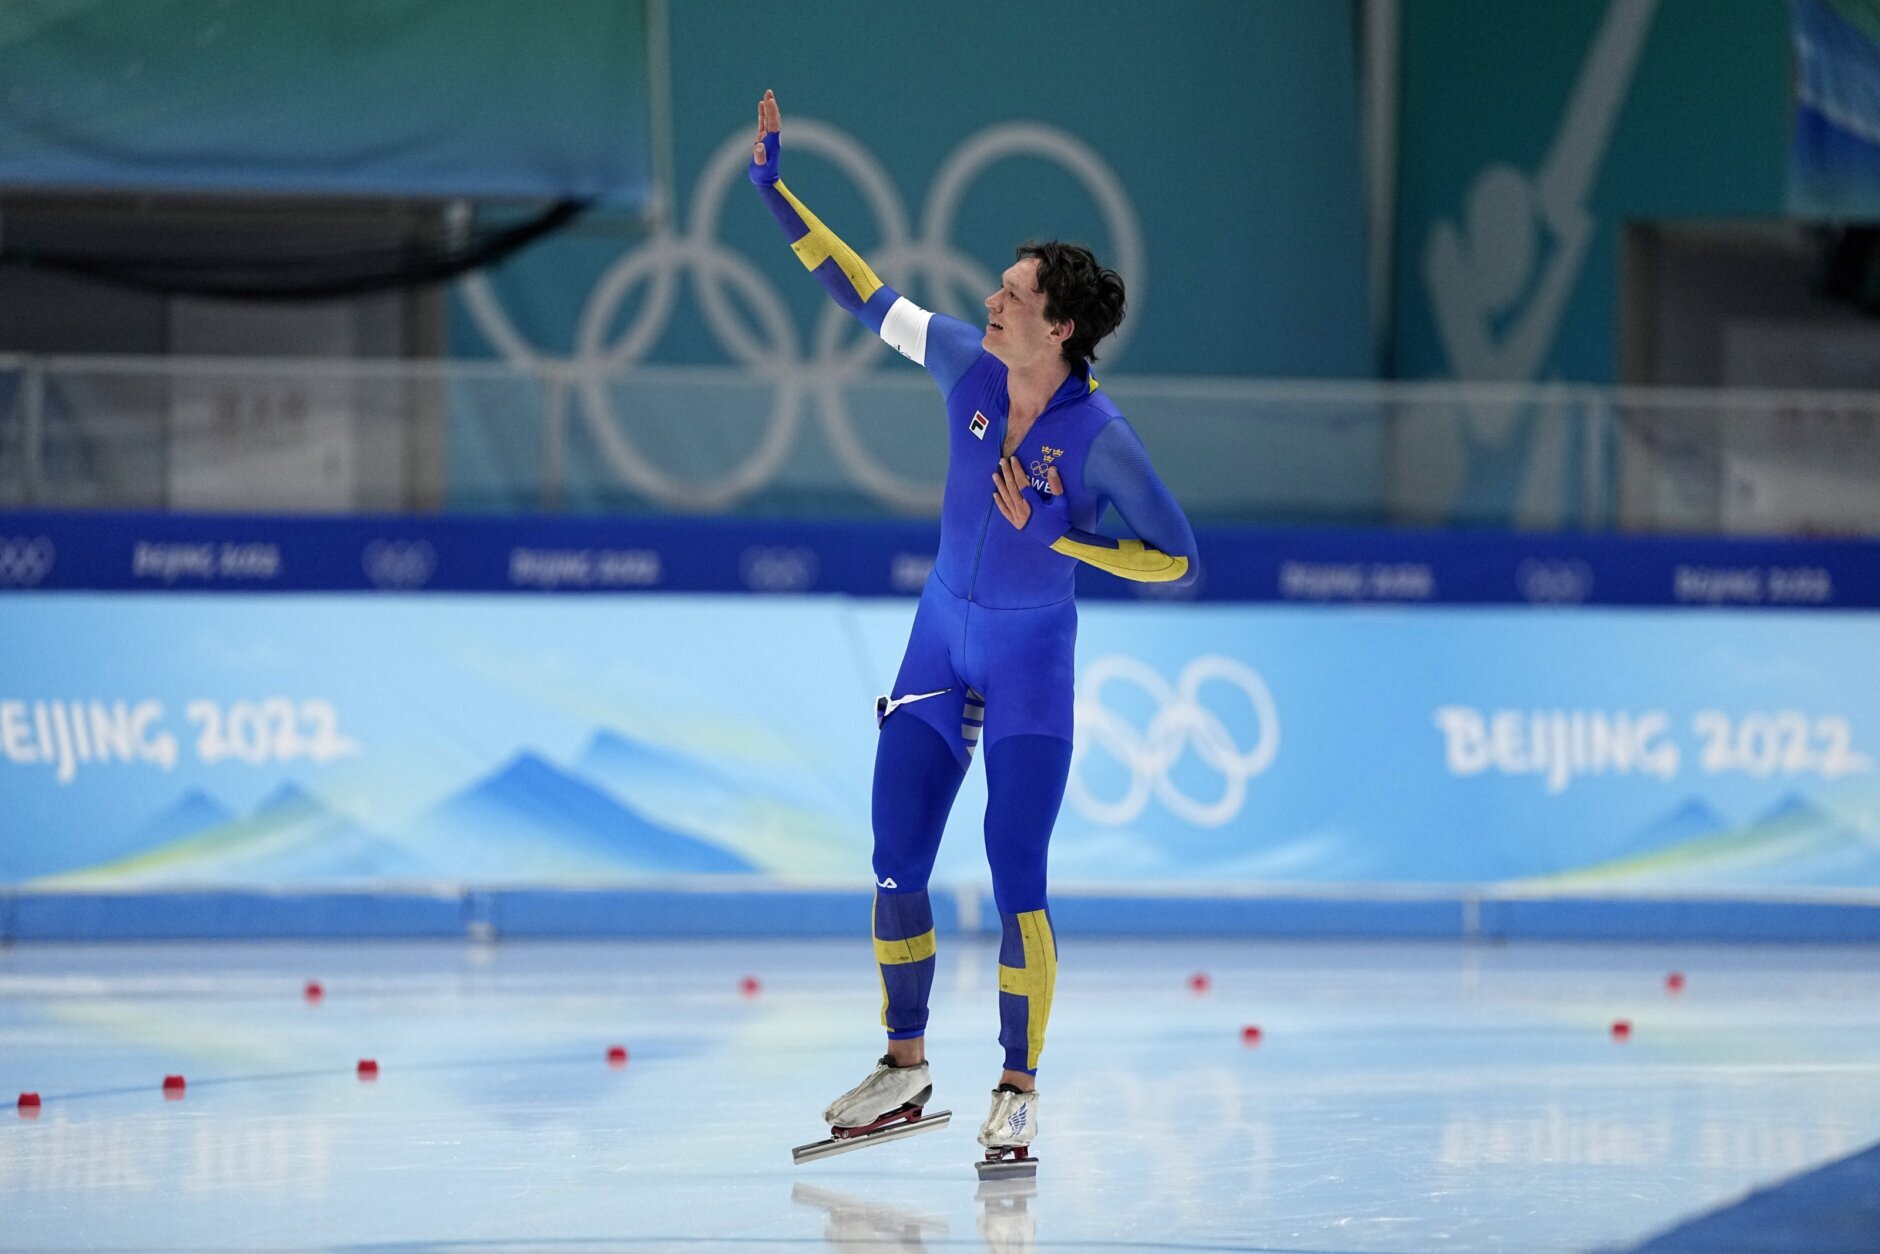 Nils van der Poel of Sweden reacts after breaking his own world record in the men's speedskating 10,000-meter race at the 2022 Winter Olympics, Friday, Feb. 11, 2022, in Beijing. (AP Photo/Ashley Landis)